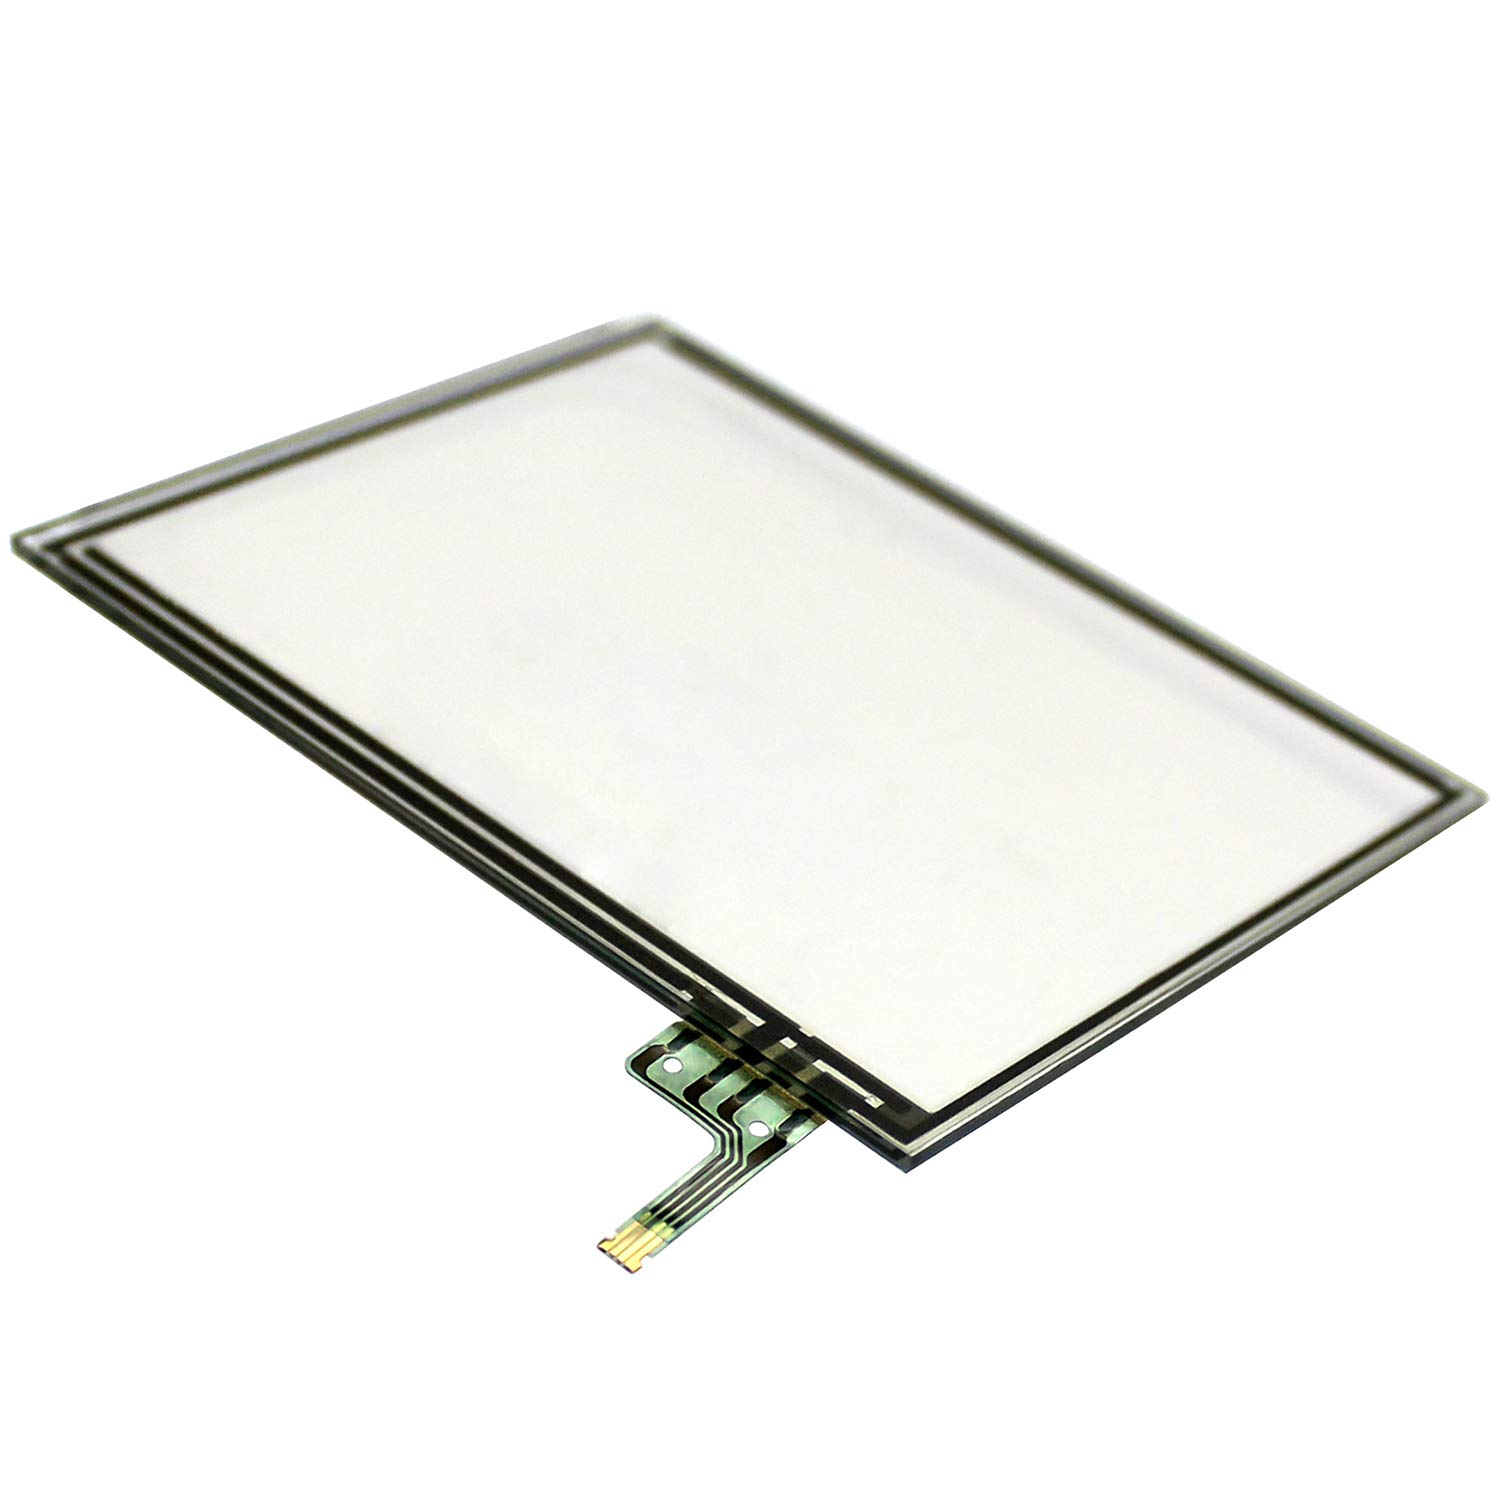 OSTENT Touch Screen Digitizer Repair Replacement Part for Nintendo DS Lite NDSL Console